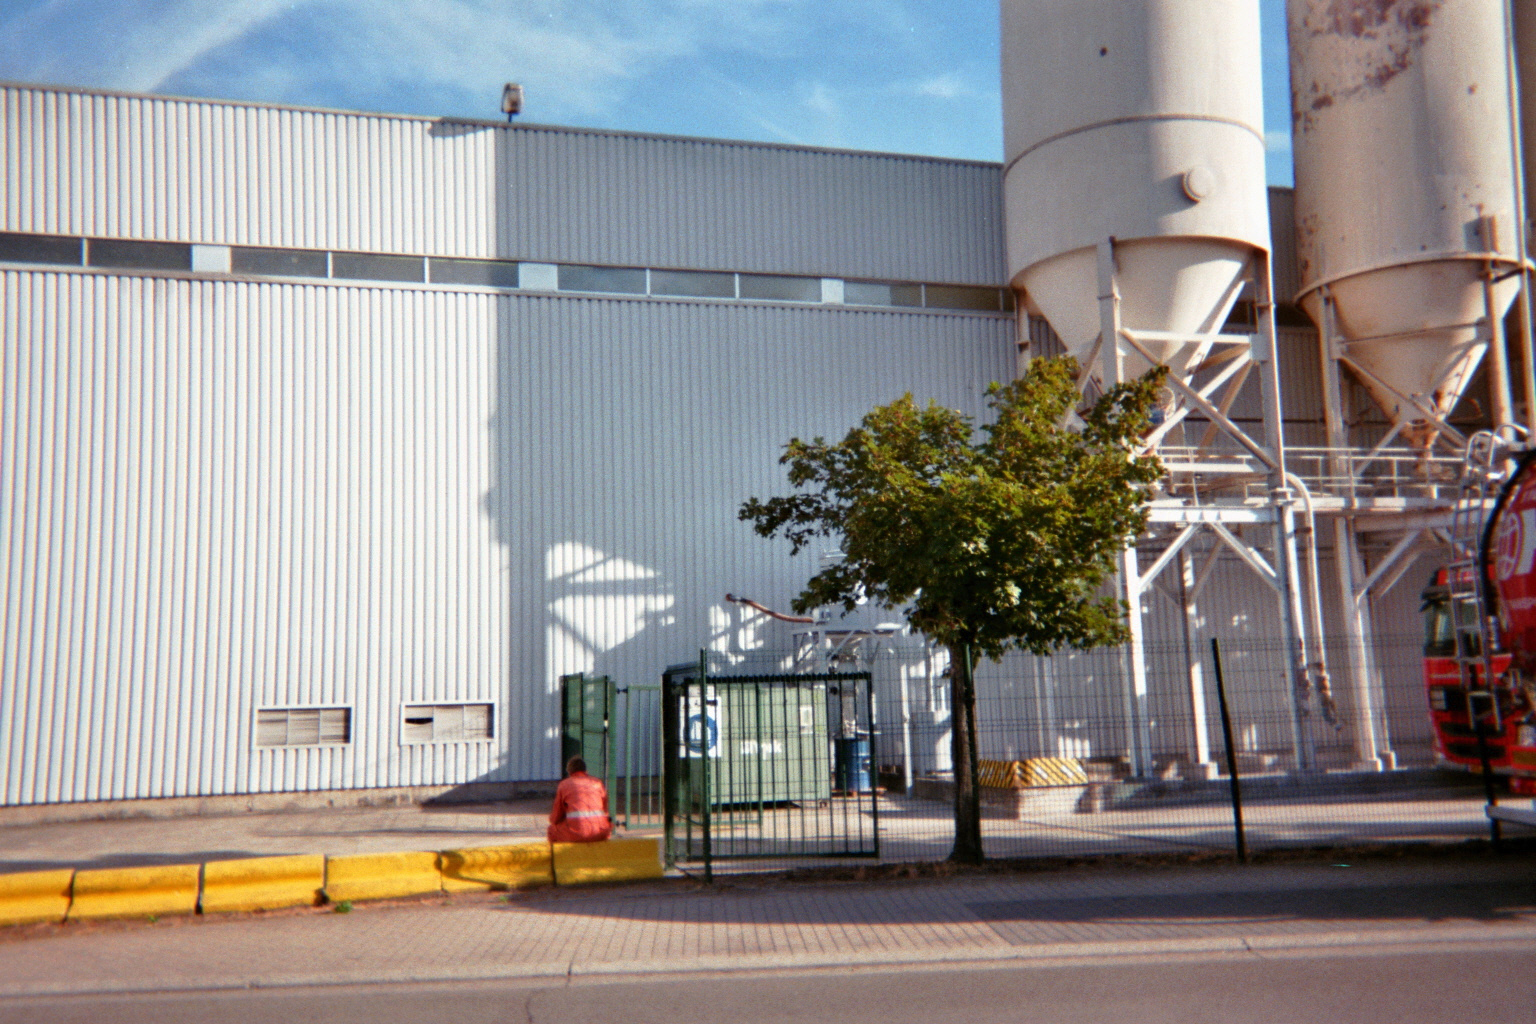 Person sitting with orange jumpsuit in front of industrial building facing away